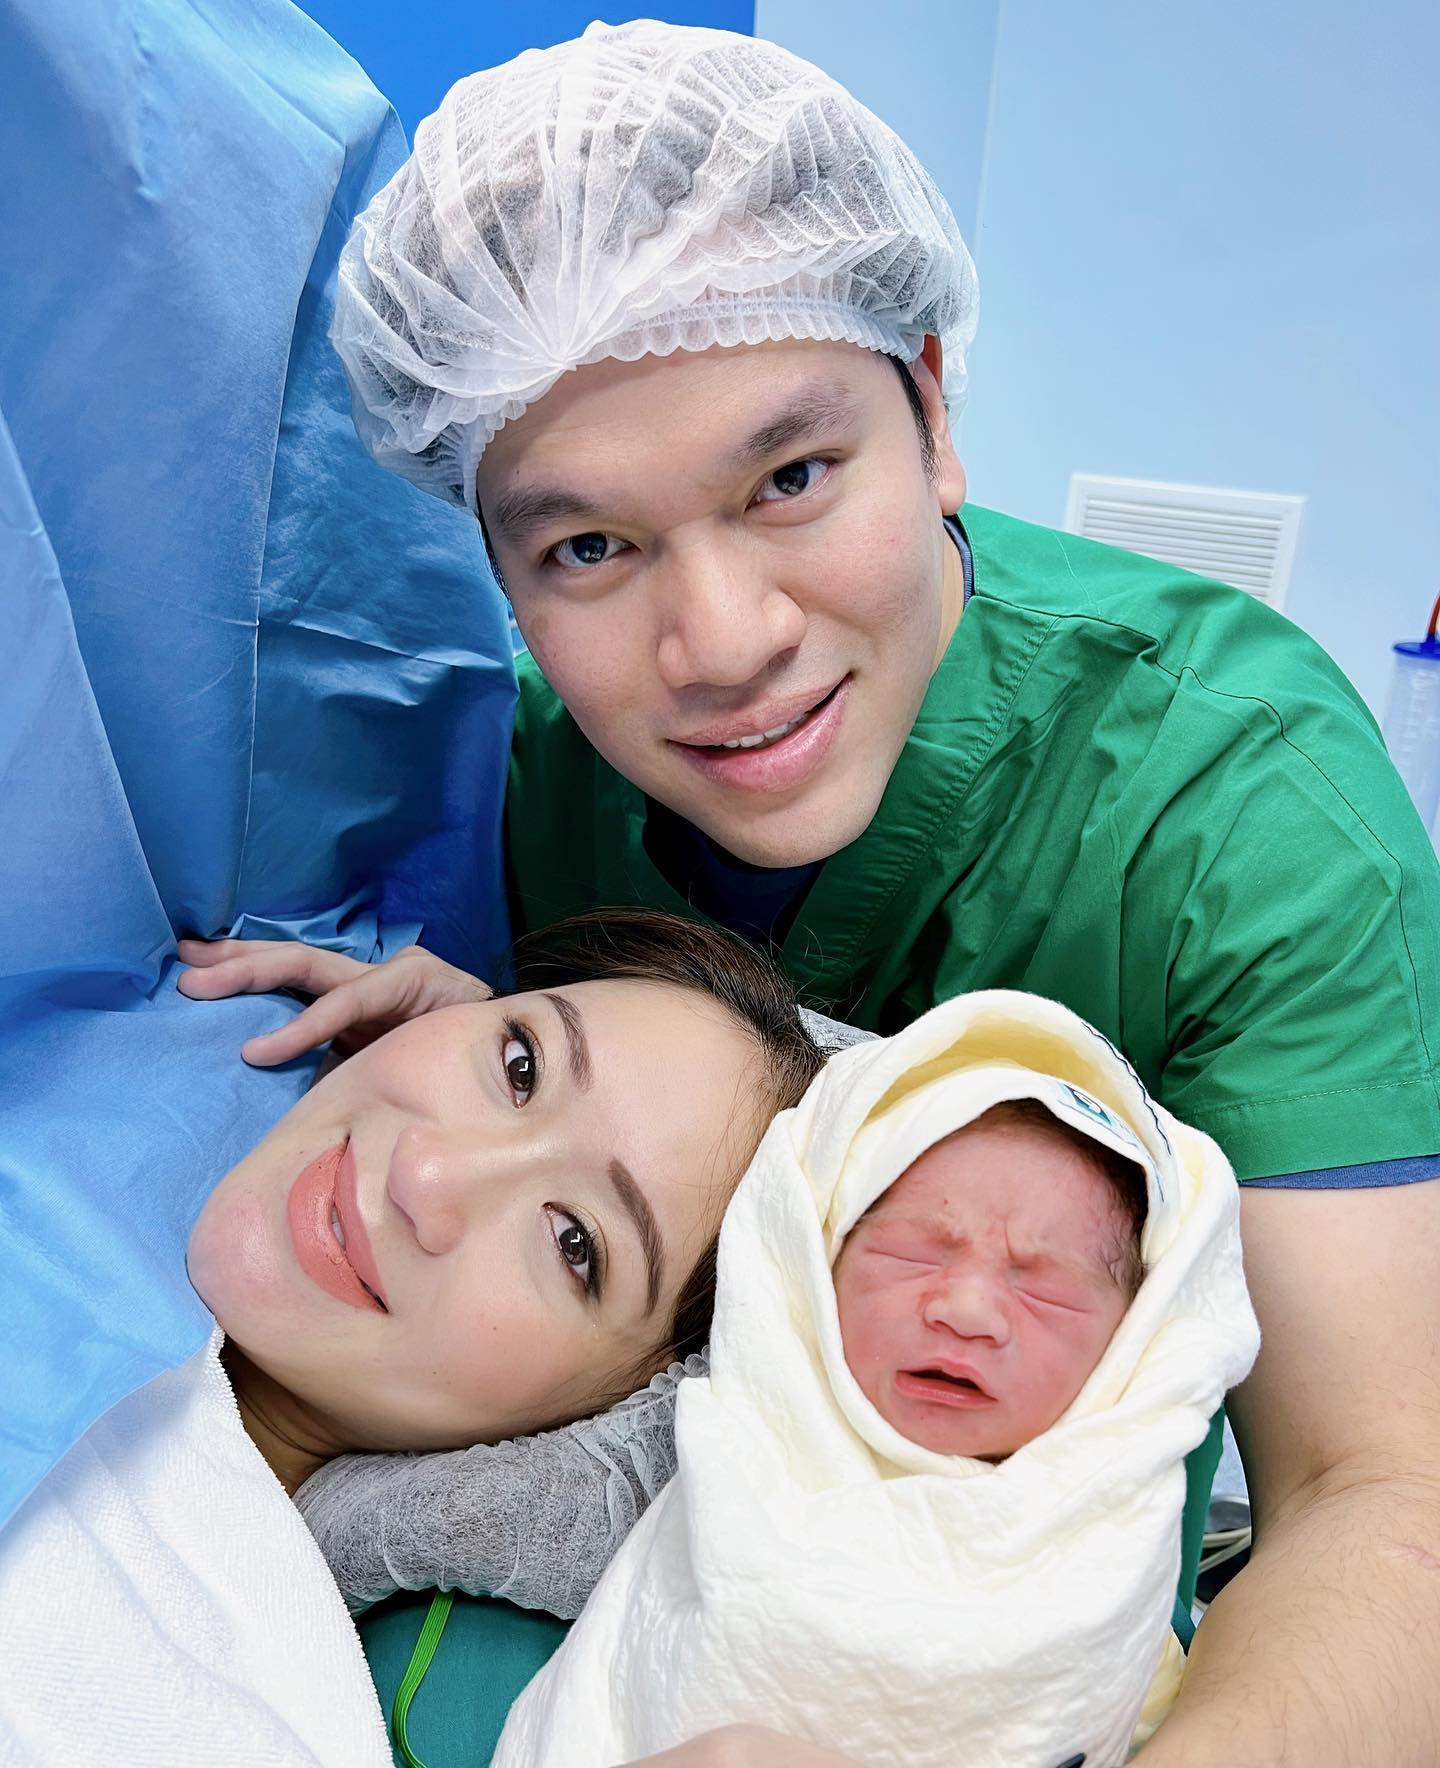 A photo Paetongtarn ‘Ung-Ing’ Shinawatra shared on Instagram celebrating the birth of her son Thasin. Photo: Instagram/@ingshin21